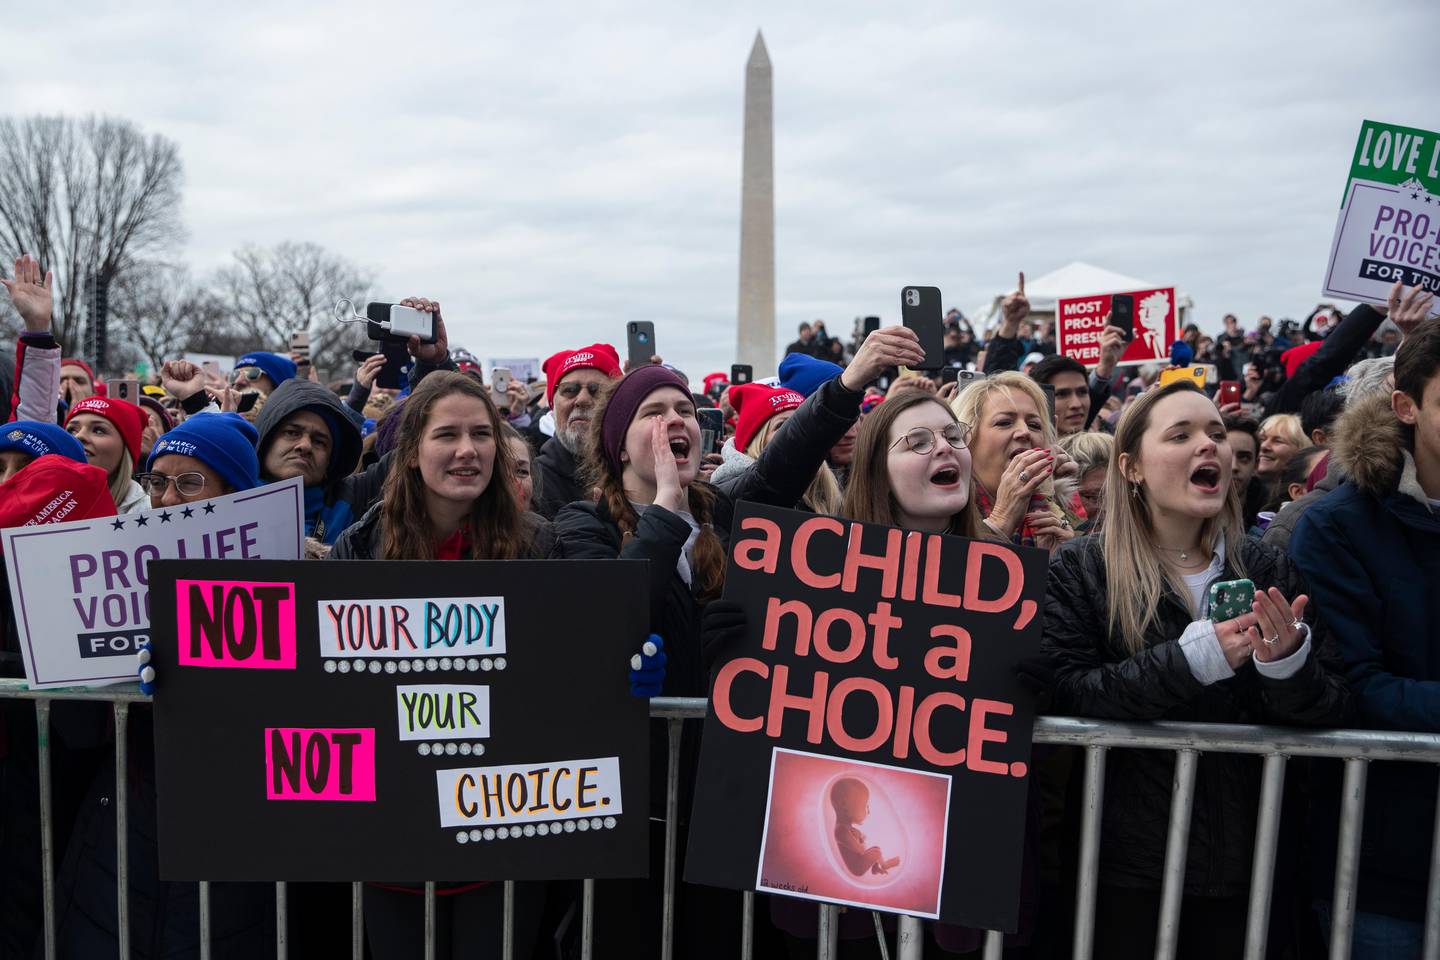 Supporters cheer as President Donald Trump speaks during the annual "March for Life" rally on the National Mall, Friday, Jan. 24, 2020, in Washington. (AP Photo/ Evan Vucci)